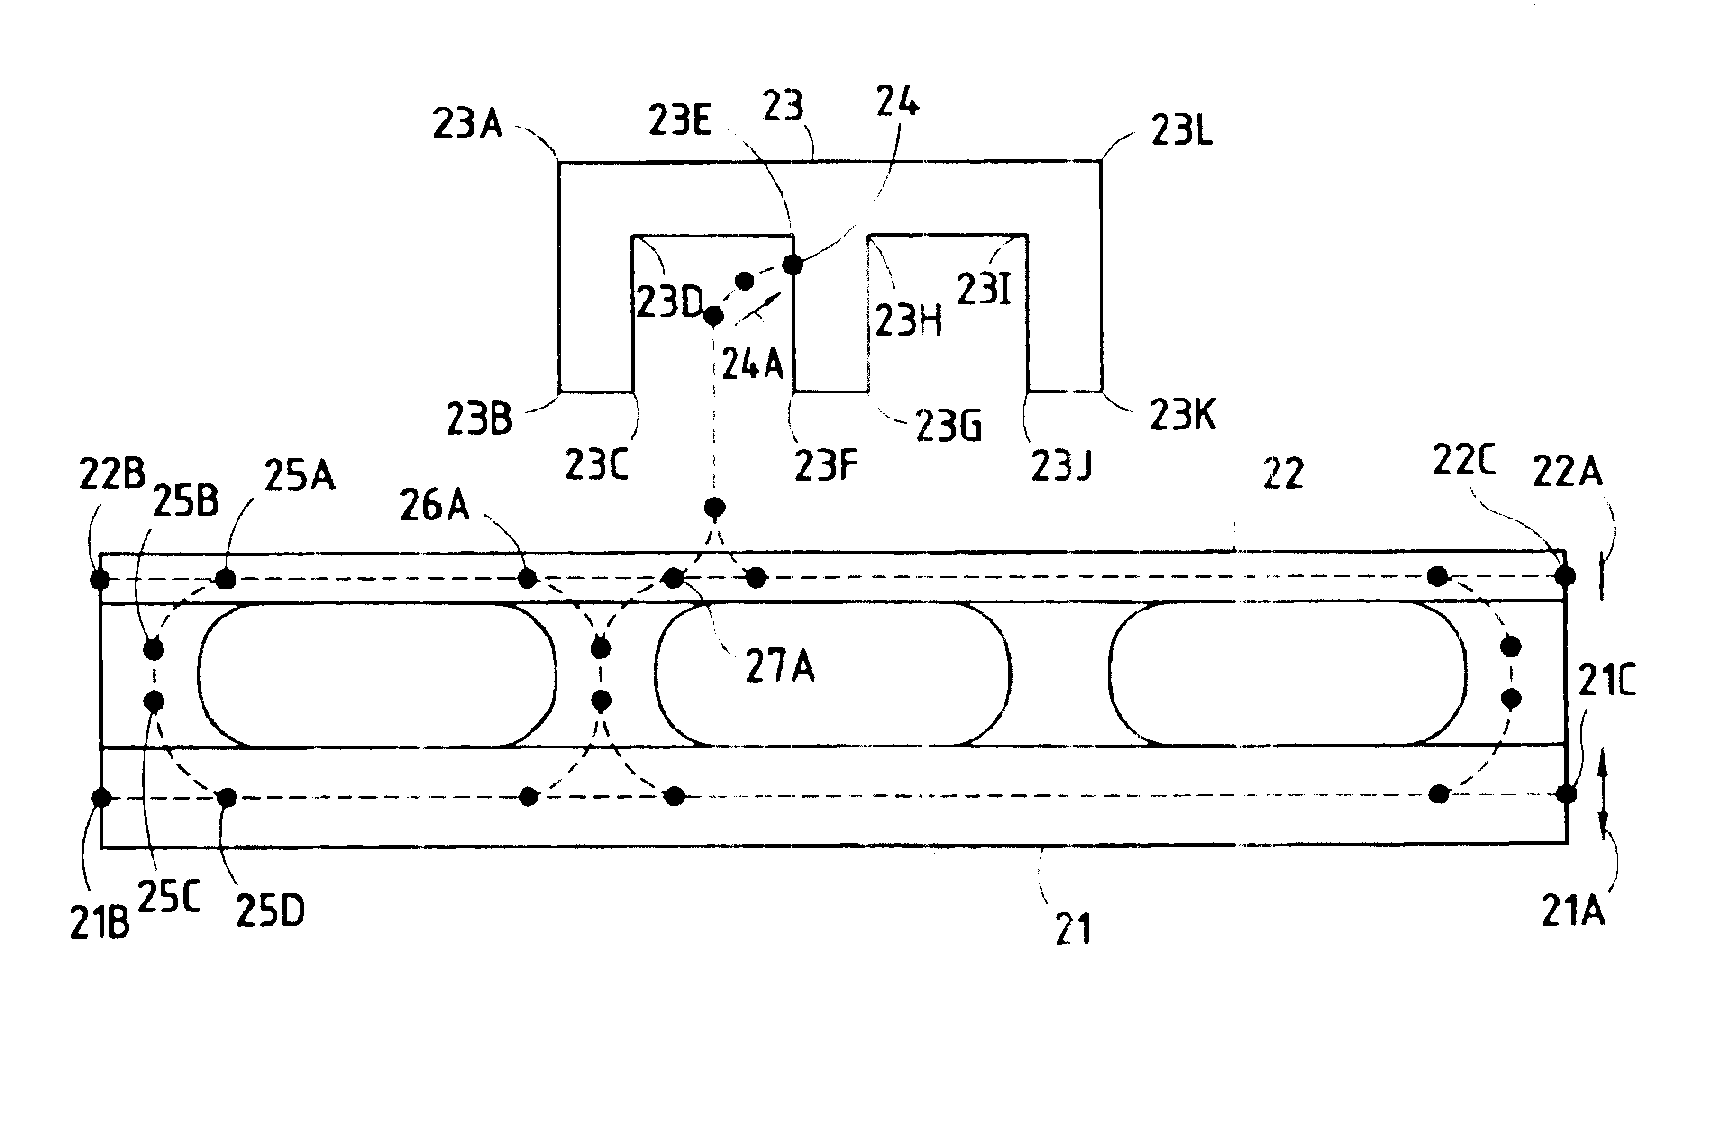 Airport map system with compact feature data storage